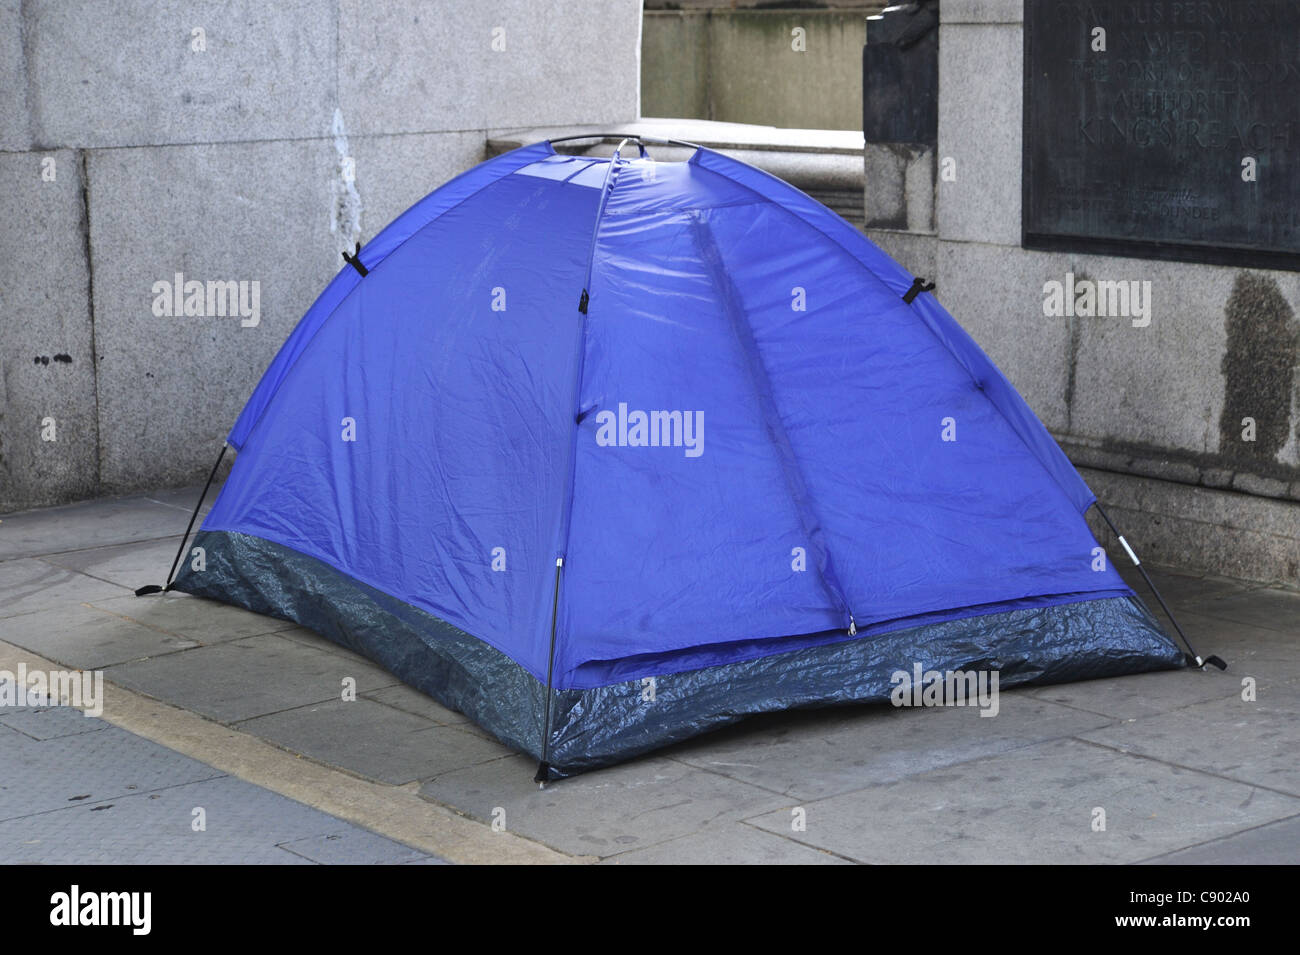 Tent pitched in Central London by the river Thames, UK Stock Photo